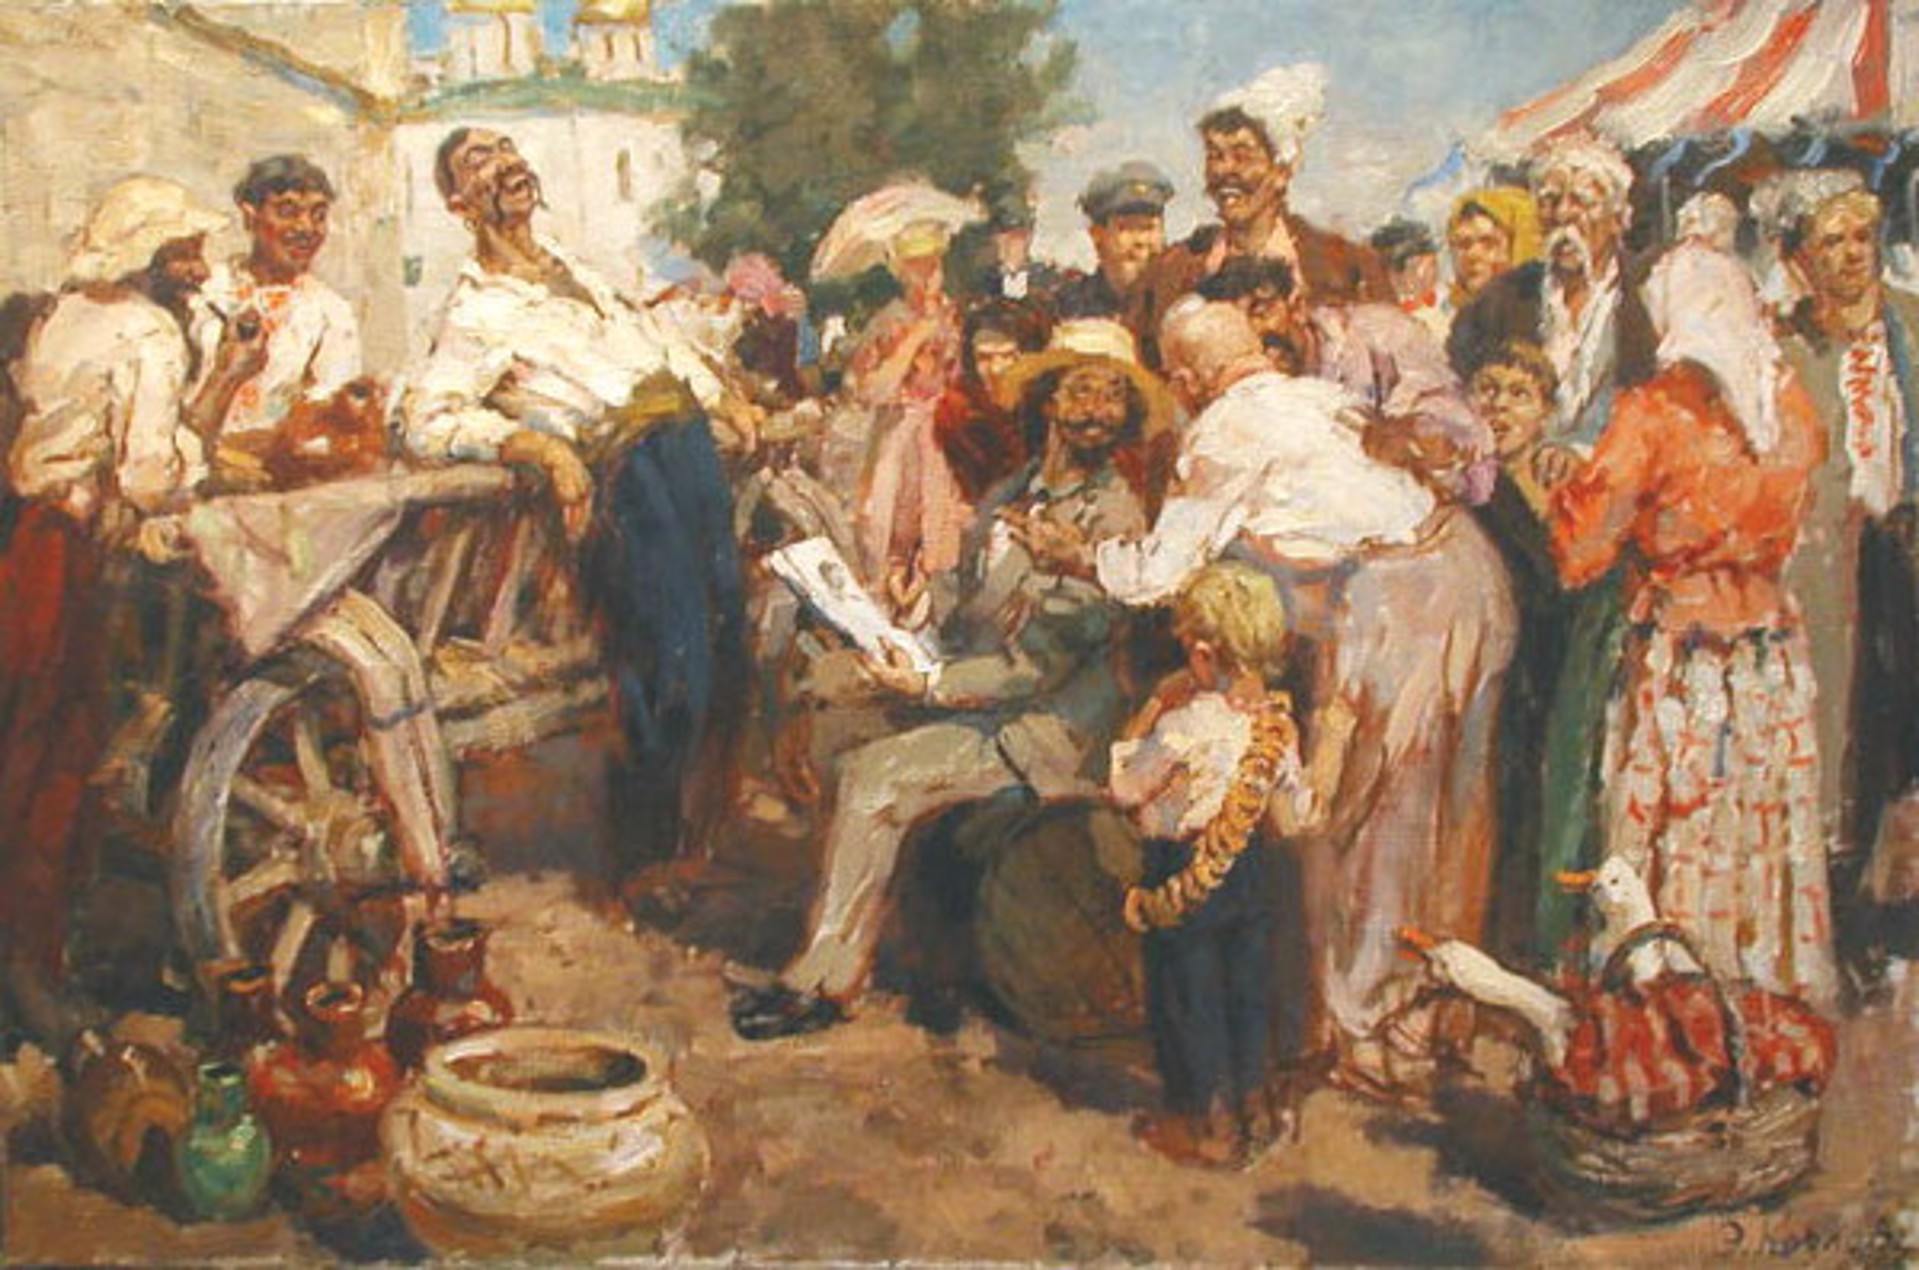 Repin is Sketching for 'Zaporozhe Cossacks' by Engels Kozlov